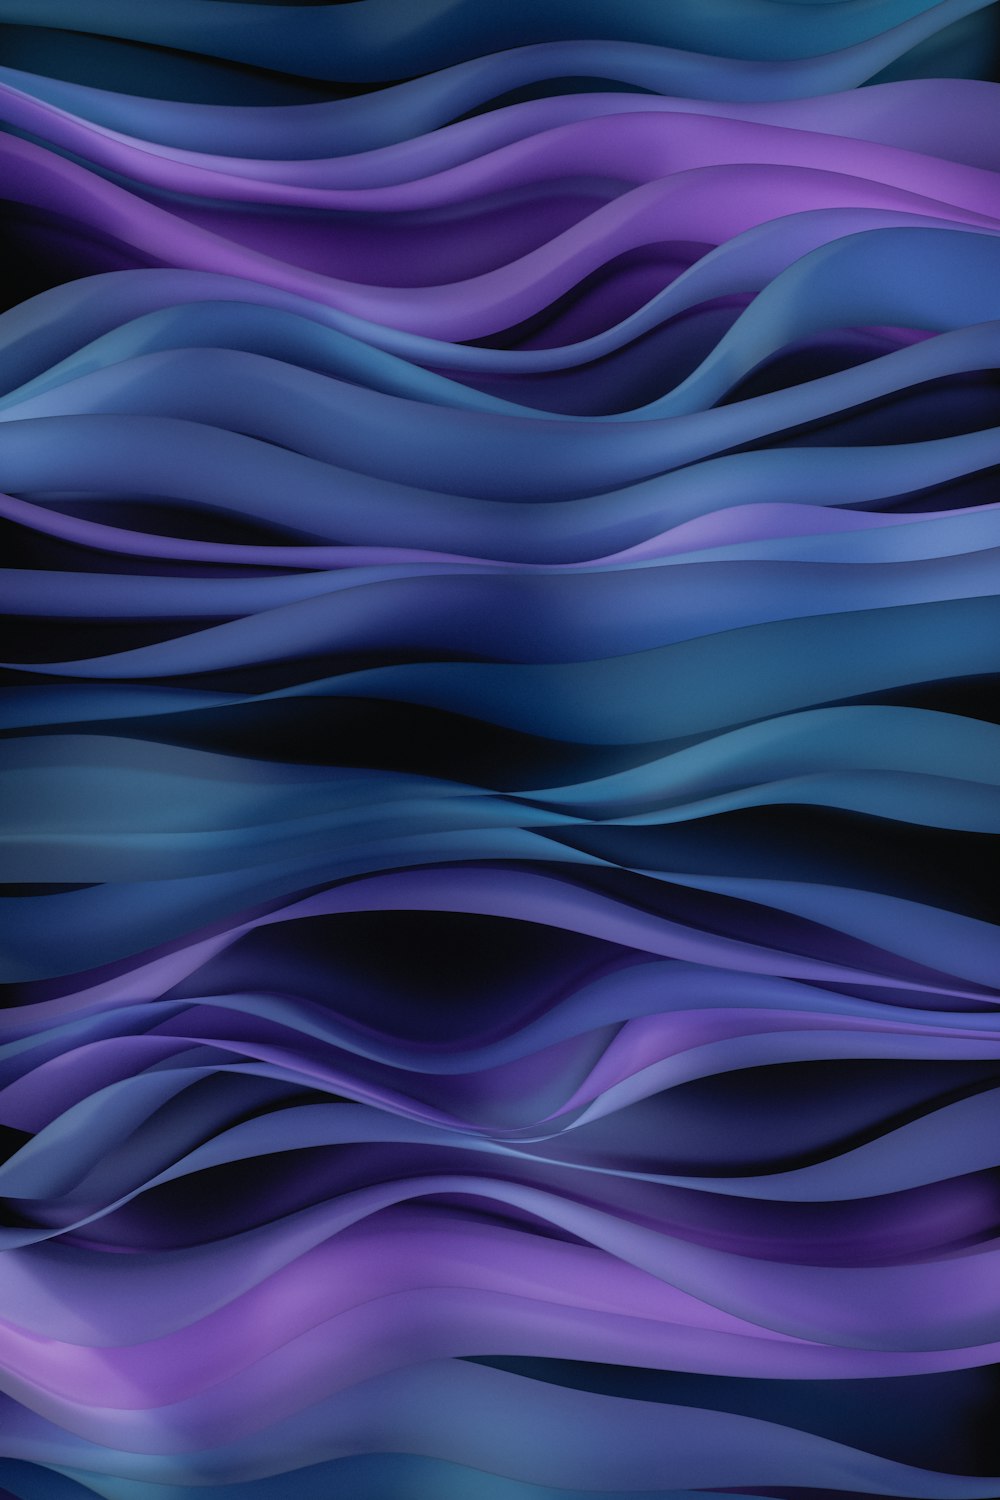 a blue and purple wavy pattern on a black background